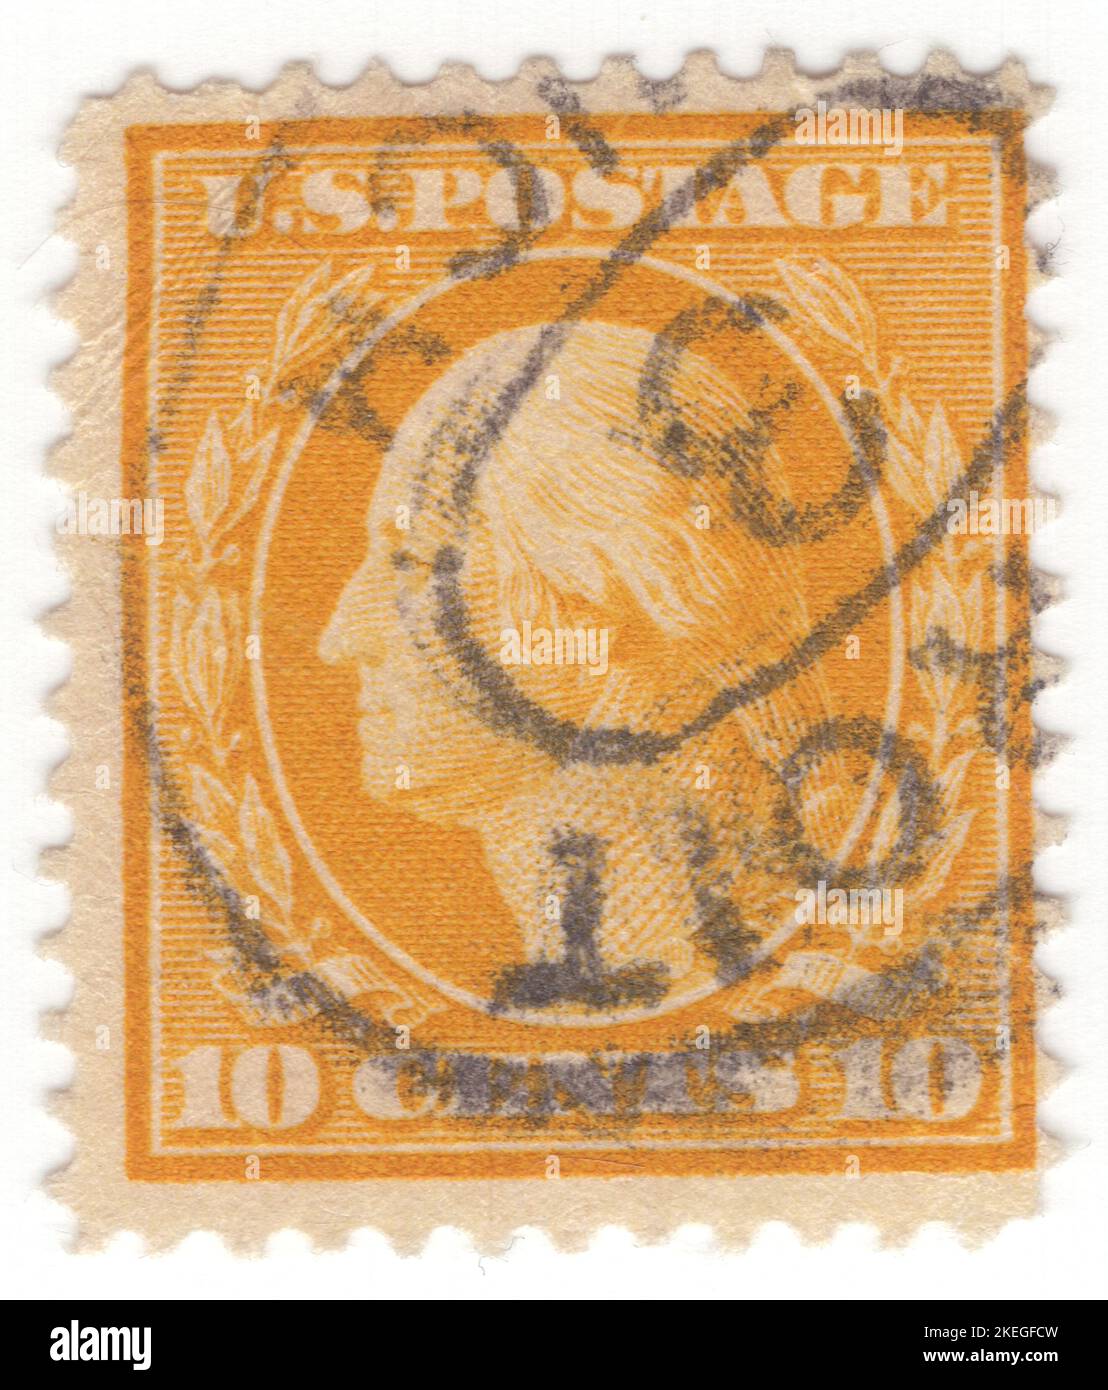 USA - 1911: An 10 cents yellow postage stamp depicting portrait of George Washington. American military officer, statesman, and Founding Father who served as the first president of the United States from 1789 to 1797. Appointed by the Continental Congress as commander of the Continental Army, Washington led the Patriot forces to victory in the American Revolutionary War and served as the president of the Constitutional Convention of 1787, which created the Constitution of the United States and the American federal government. Washington has been called the 'Father of his Country' Stock Photo